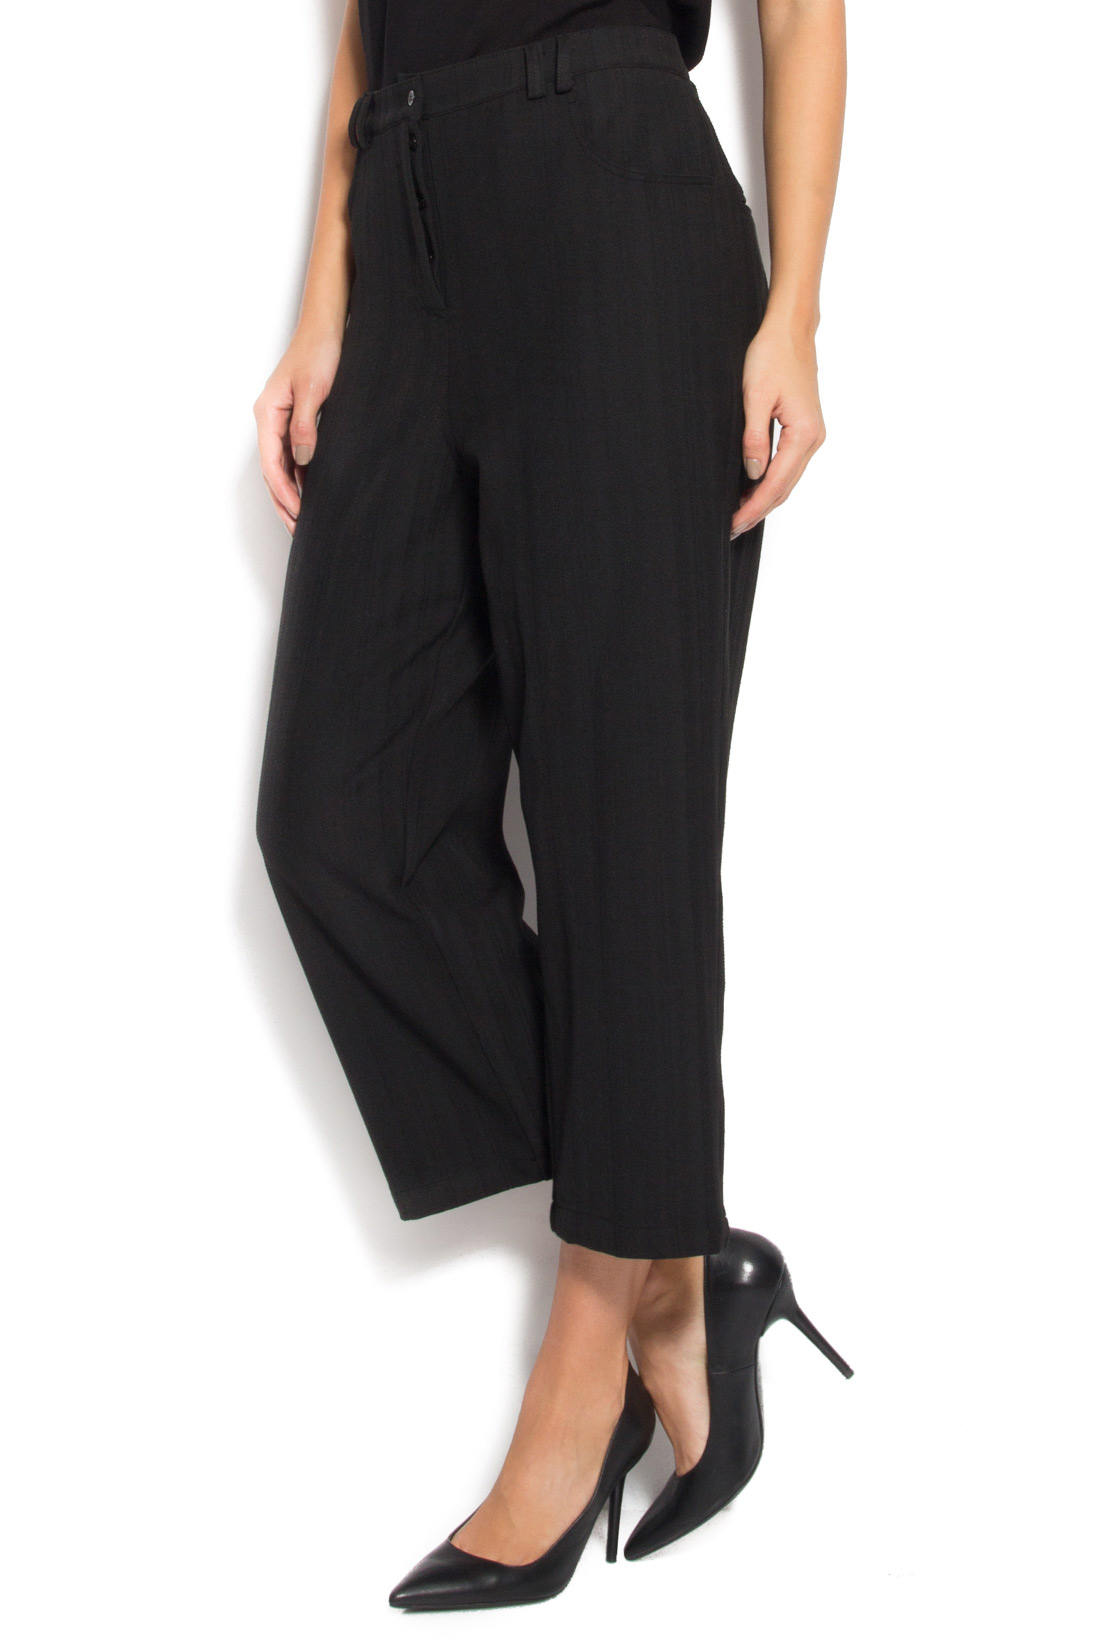 'Collected Trousers' wool-blend wide-leg culottes Studio Cabal image 1